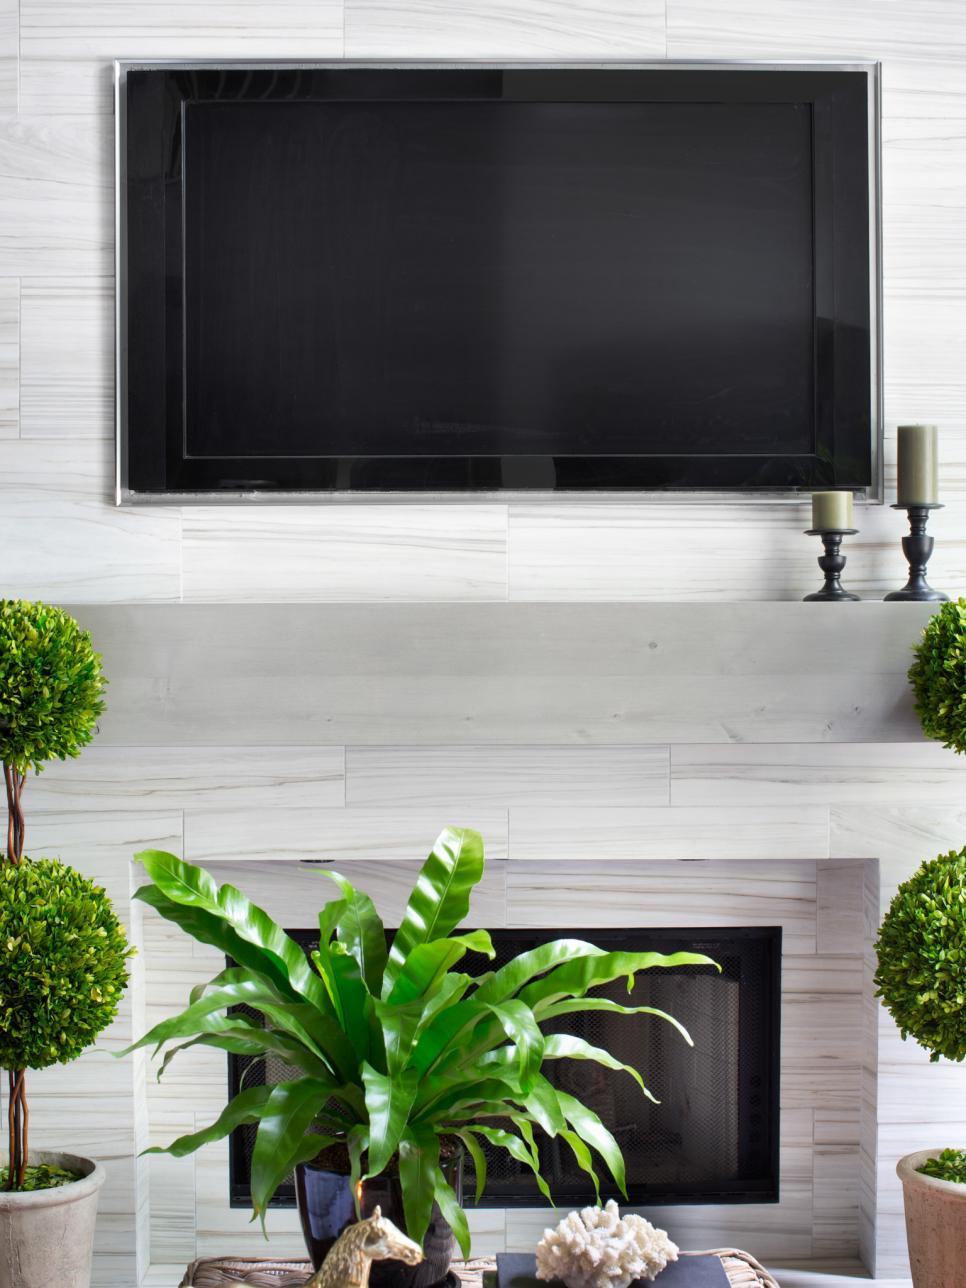 Should a TV be mounted over a fireplace?